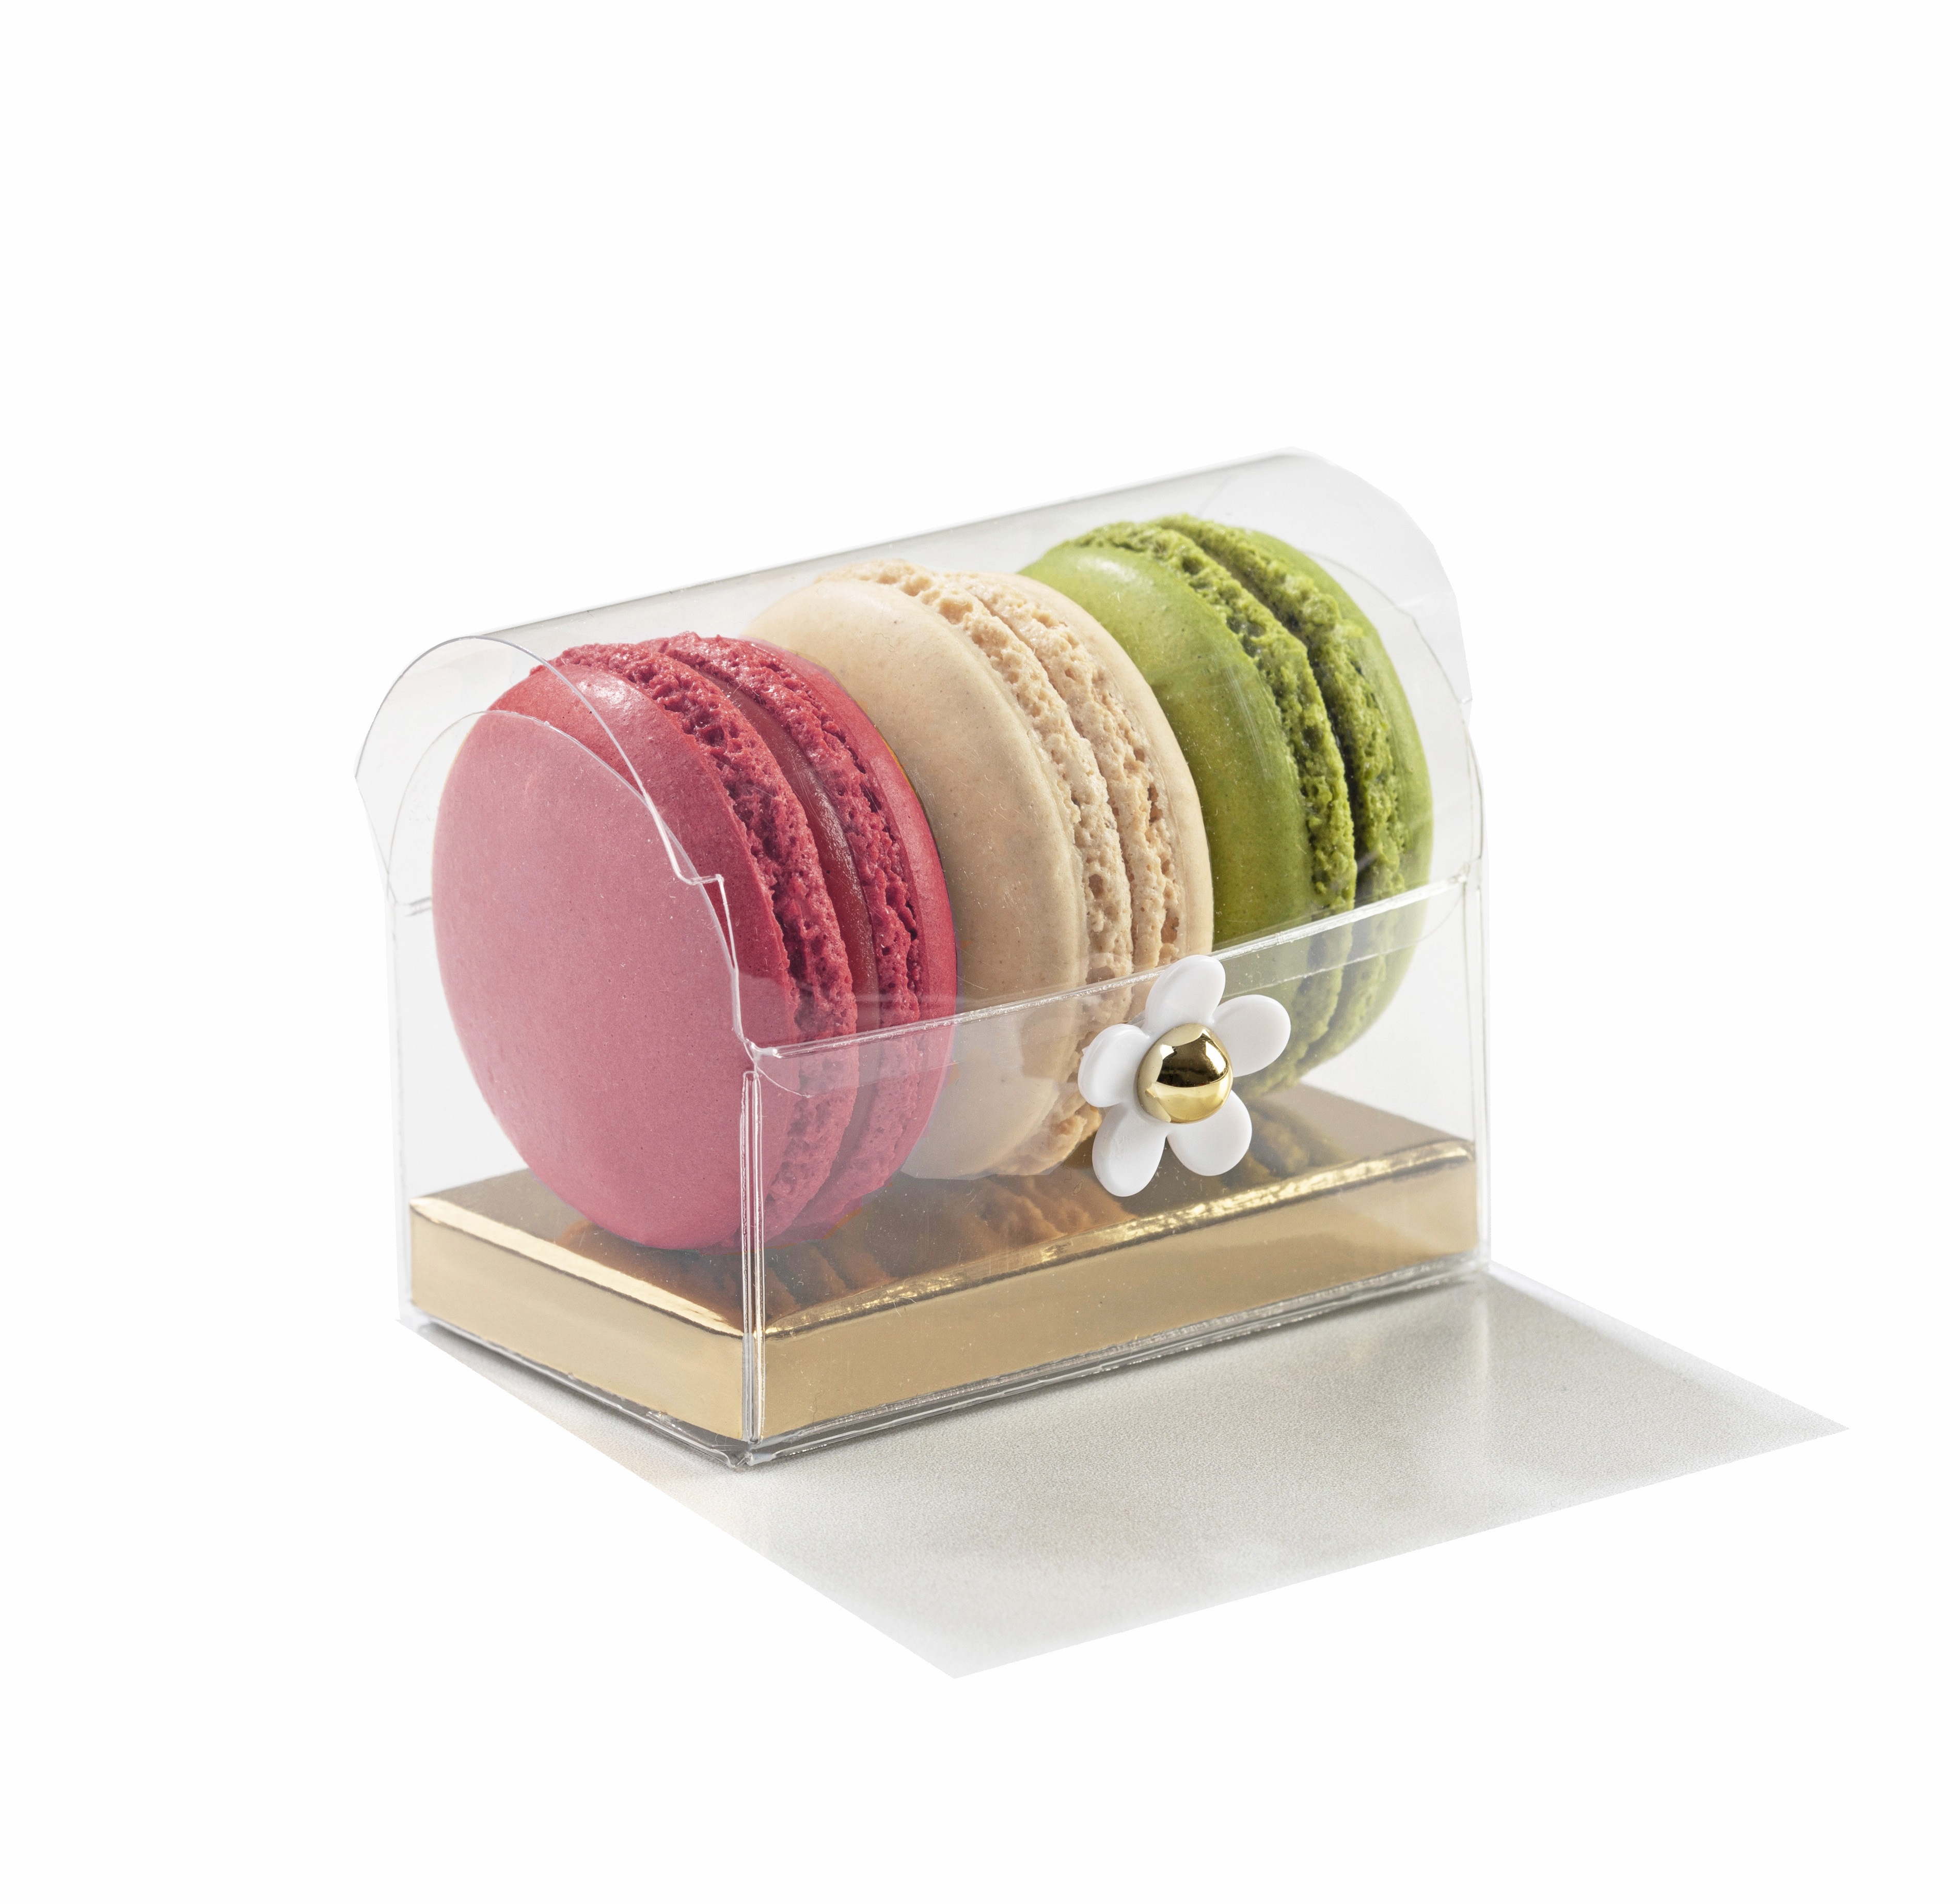 https://www.pastrychefsboutique.com/24239/pastry-chefs-boutique-36211-clear-deluxe-plastic-macarons-gift-gold-insert-3-macarons-80-x-50-x-50-mm-pack-of-50-flowers-not-inc.jpg